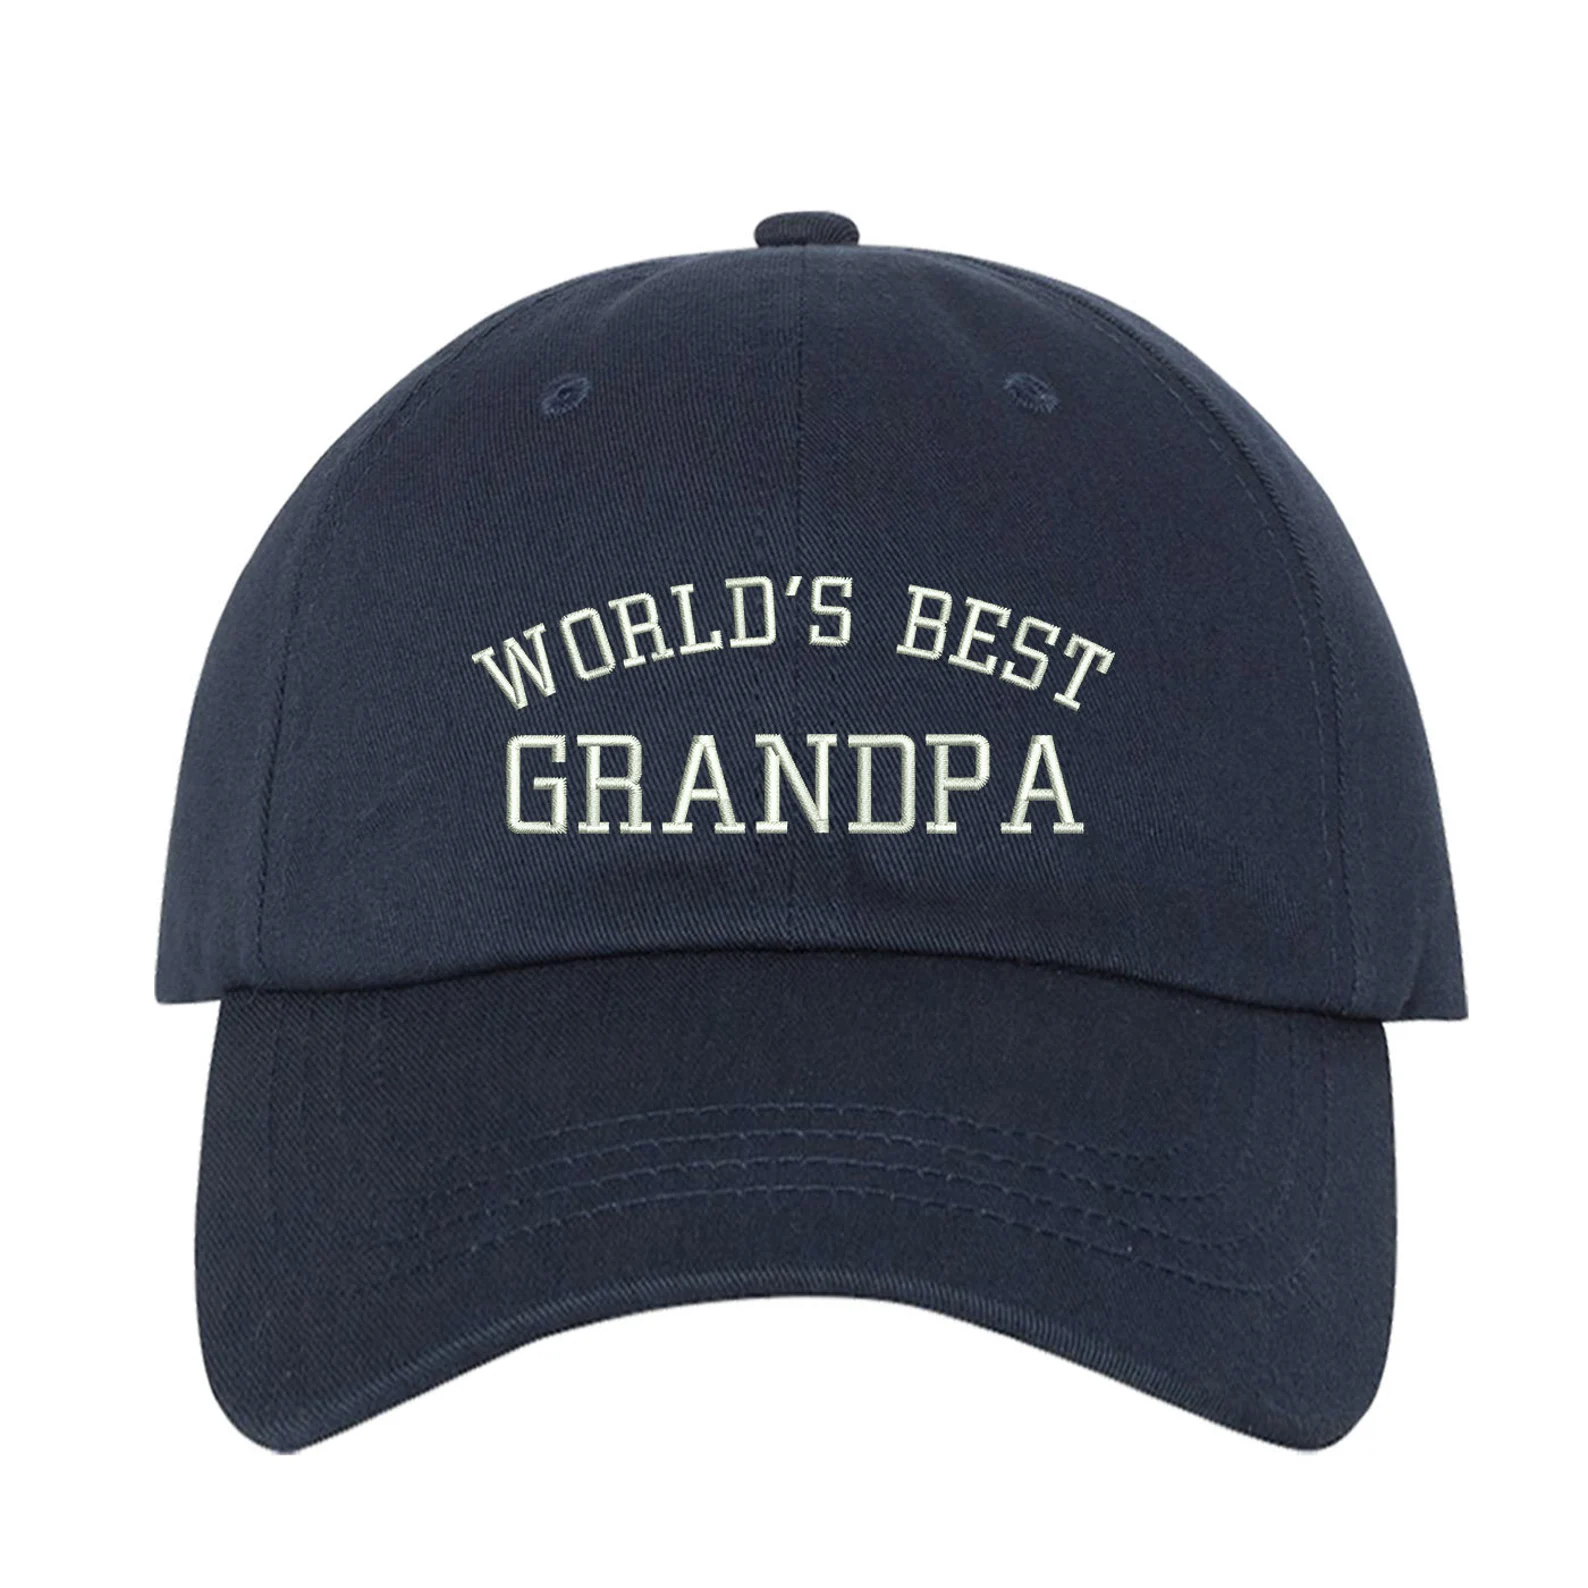 gifts for grandpa